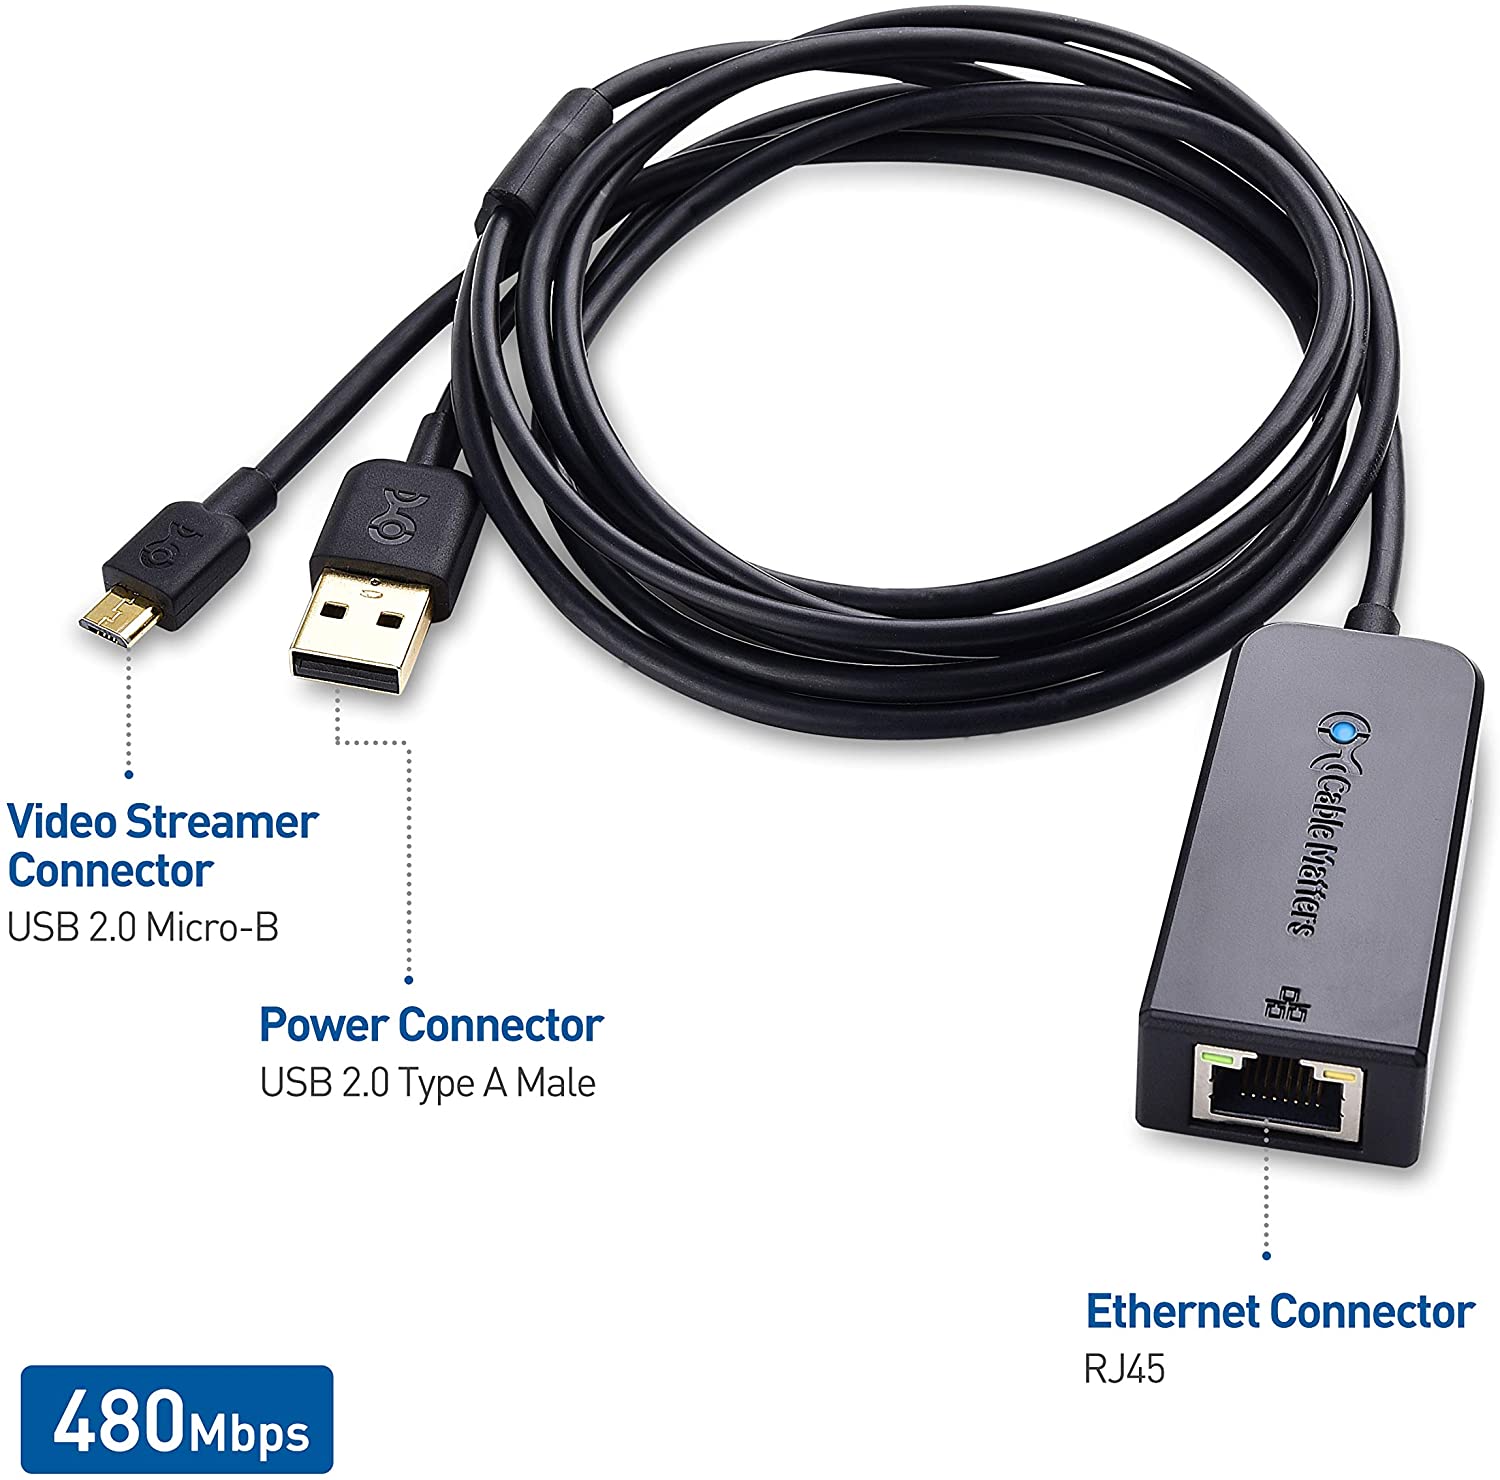 Cable Matters Micro USB to Ethernet Adapter Up to 480Mbps for Streaming Sticks Including Chromecast, Google Home Mini and More - Not Compatible with Roku Device - image 3 of 7